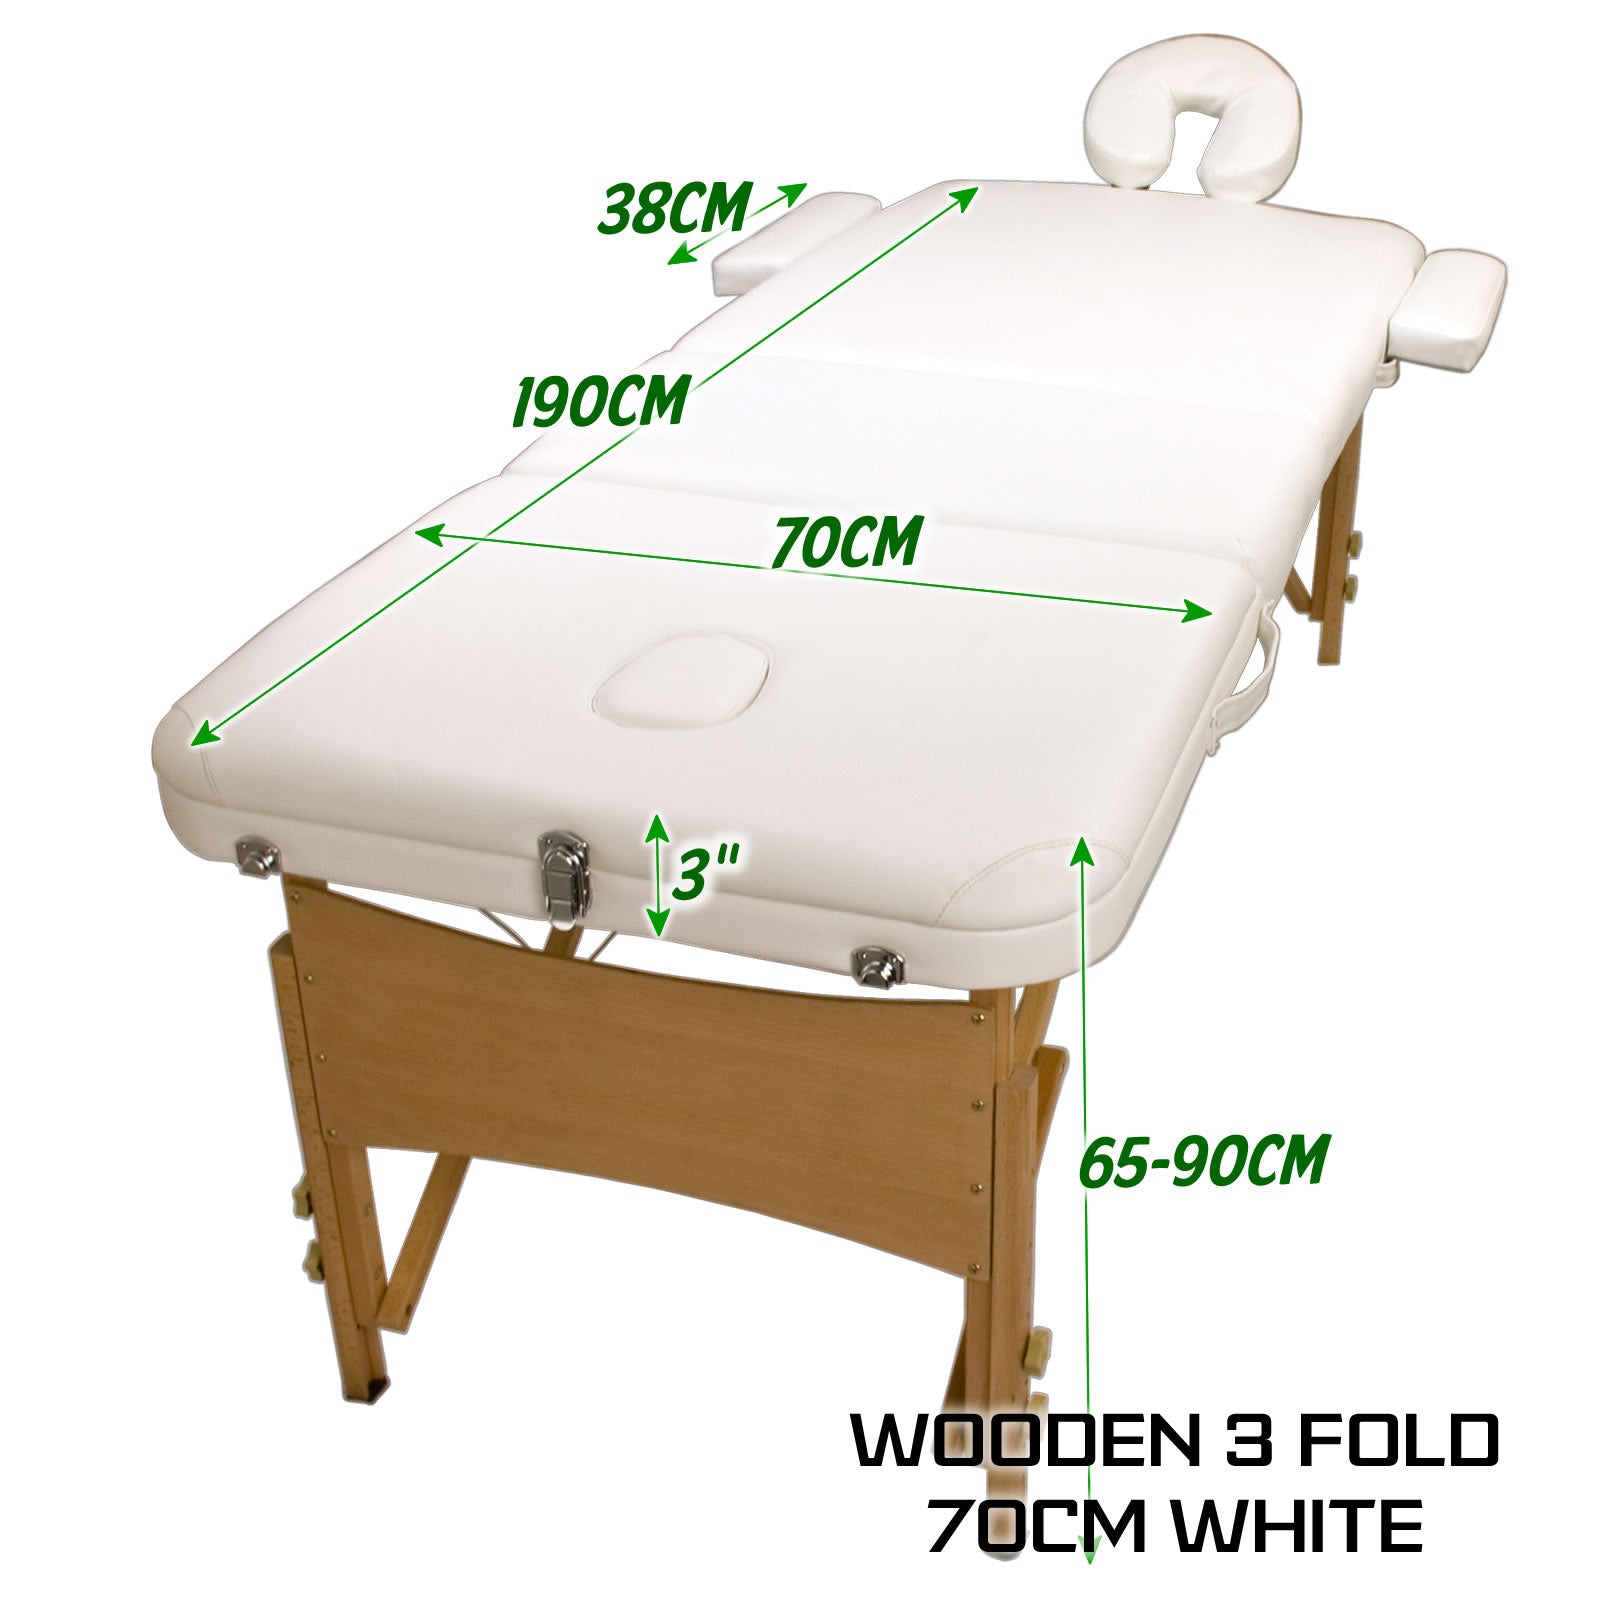 forever-beauty-white-portable-beauty-massage-table-bed-3-fold-70cm-wooden